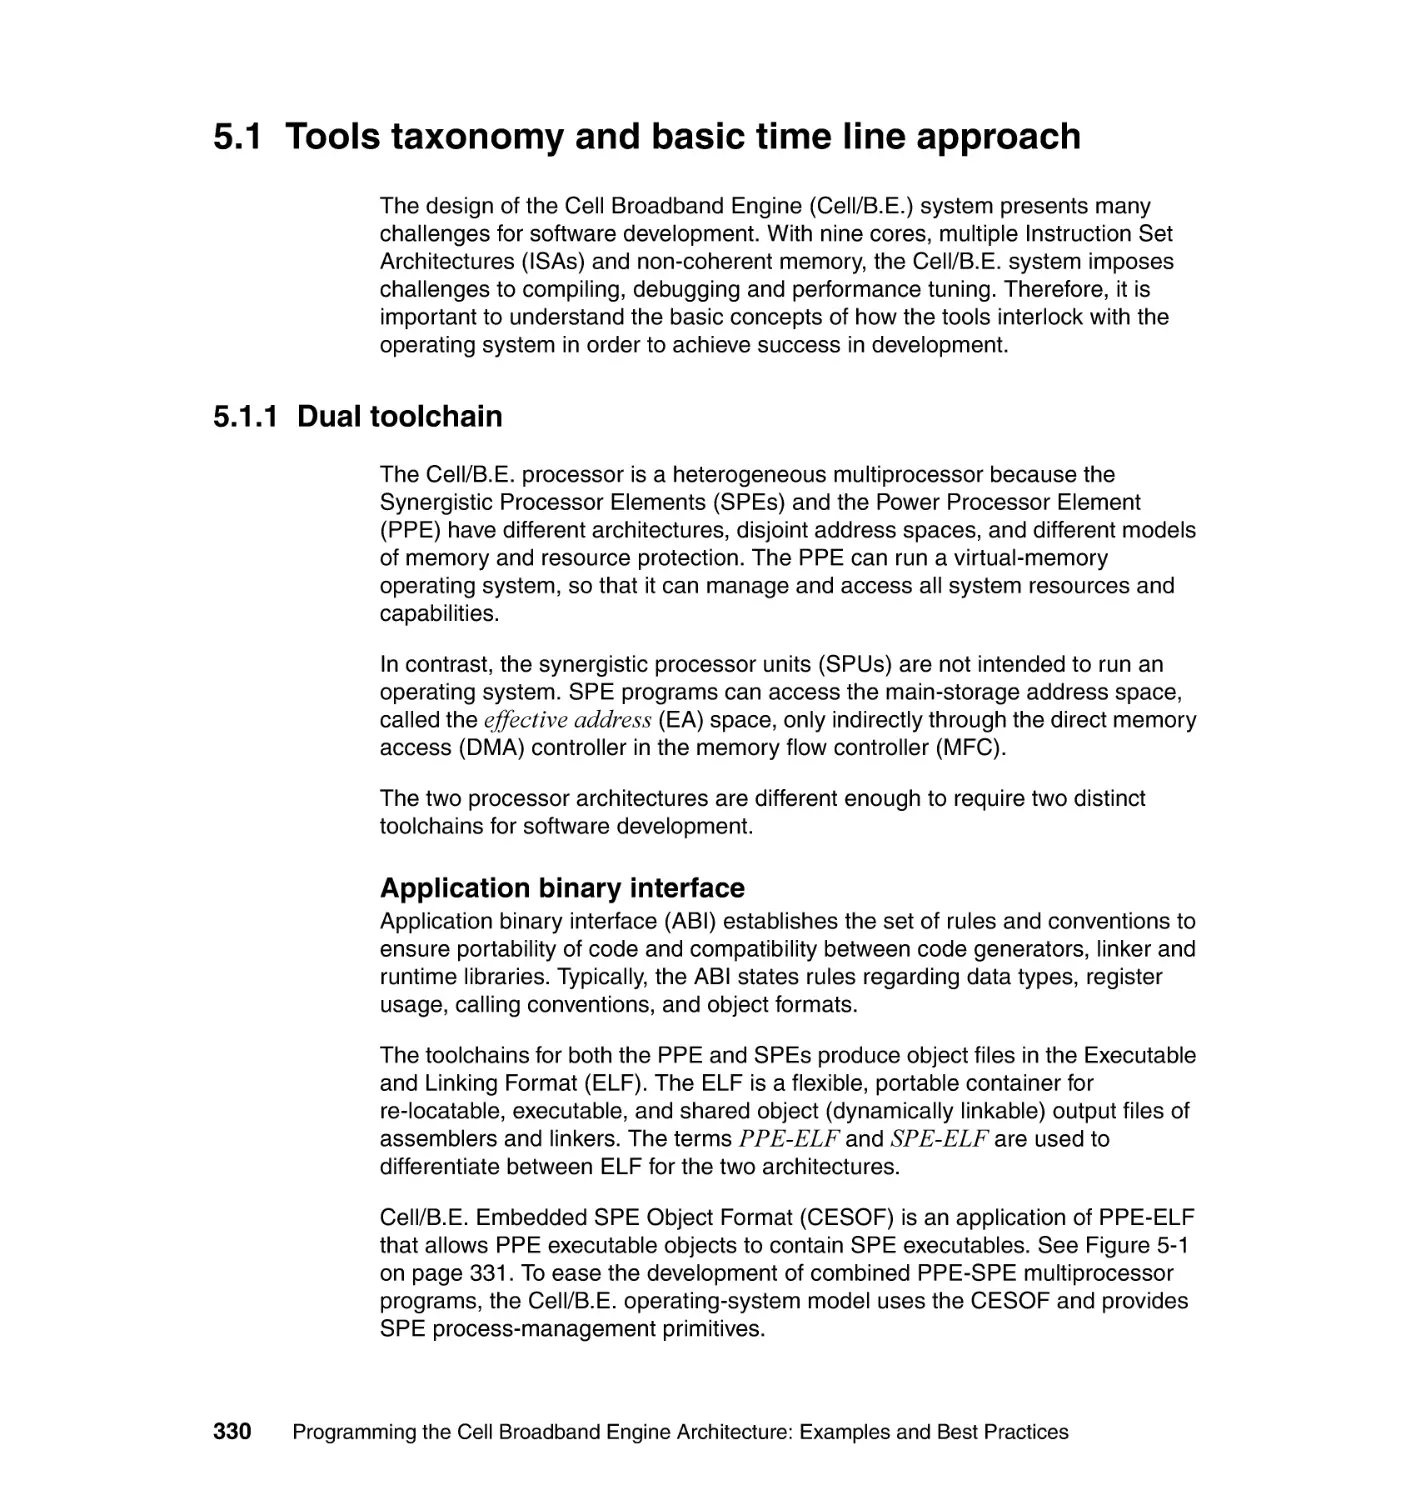 5.1 Tools taxonomy and basic time line approach
5.1.1 Dual toolchain